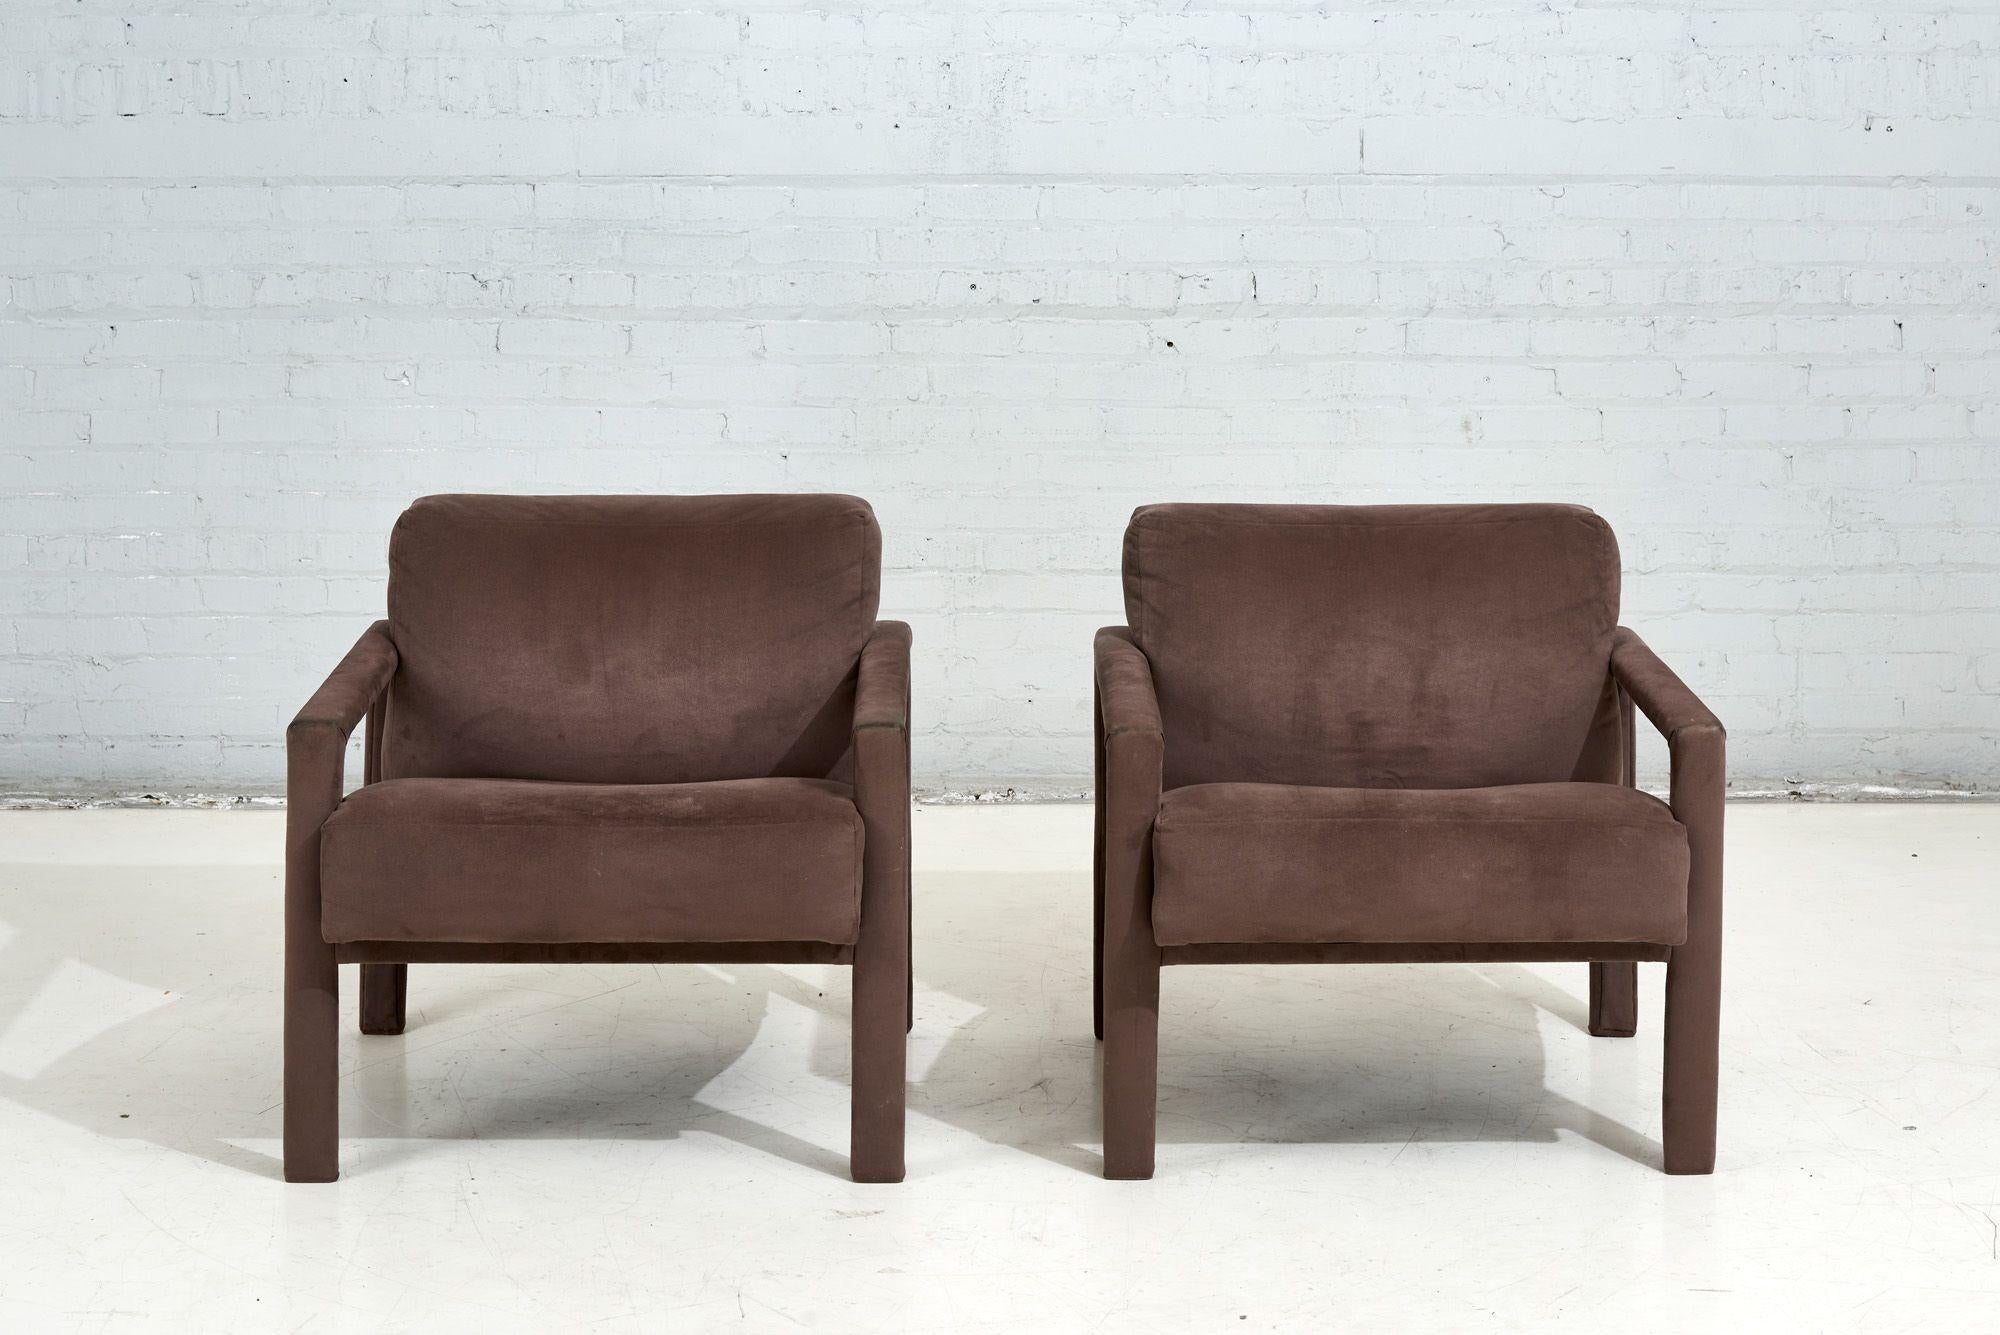 Pair Parsons Lounge chairs, 1980. Original ultra-suede upholstery shows minor wear, consistent with age and use.